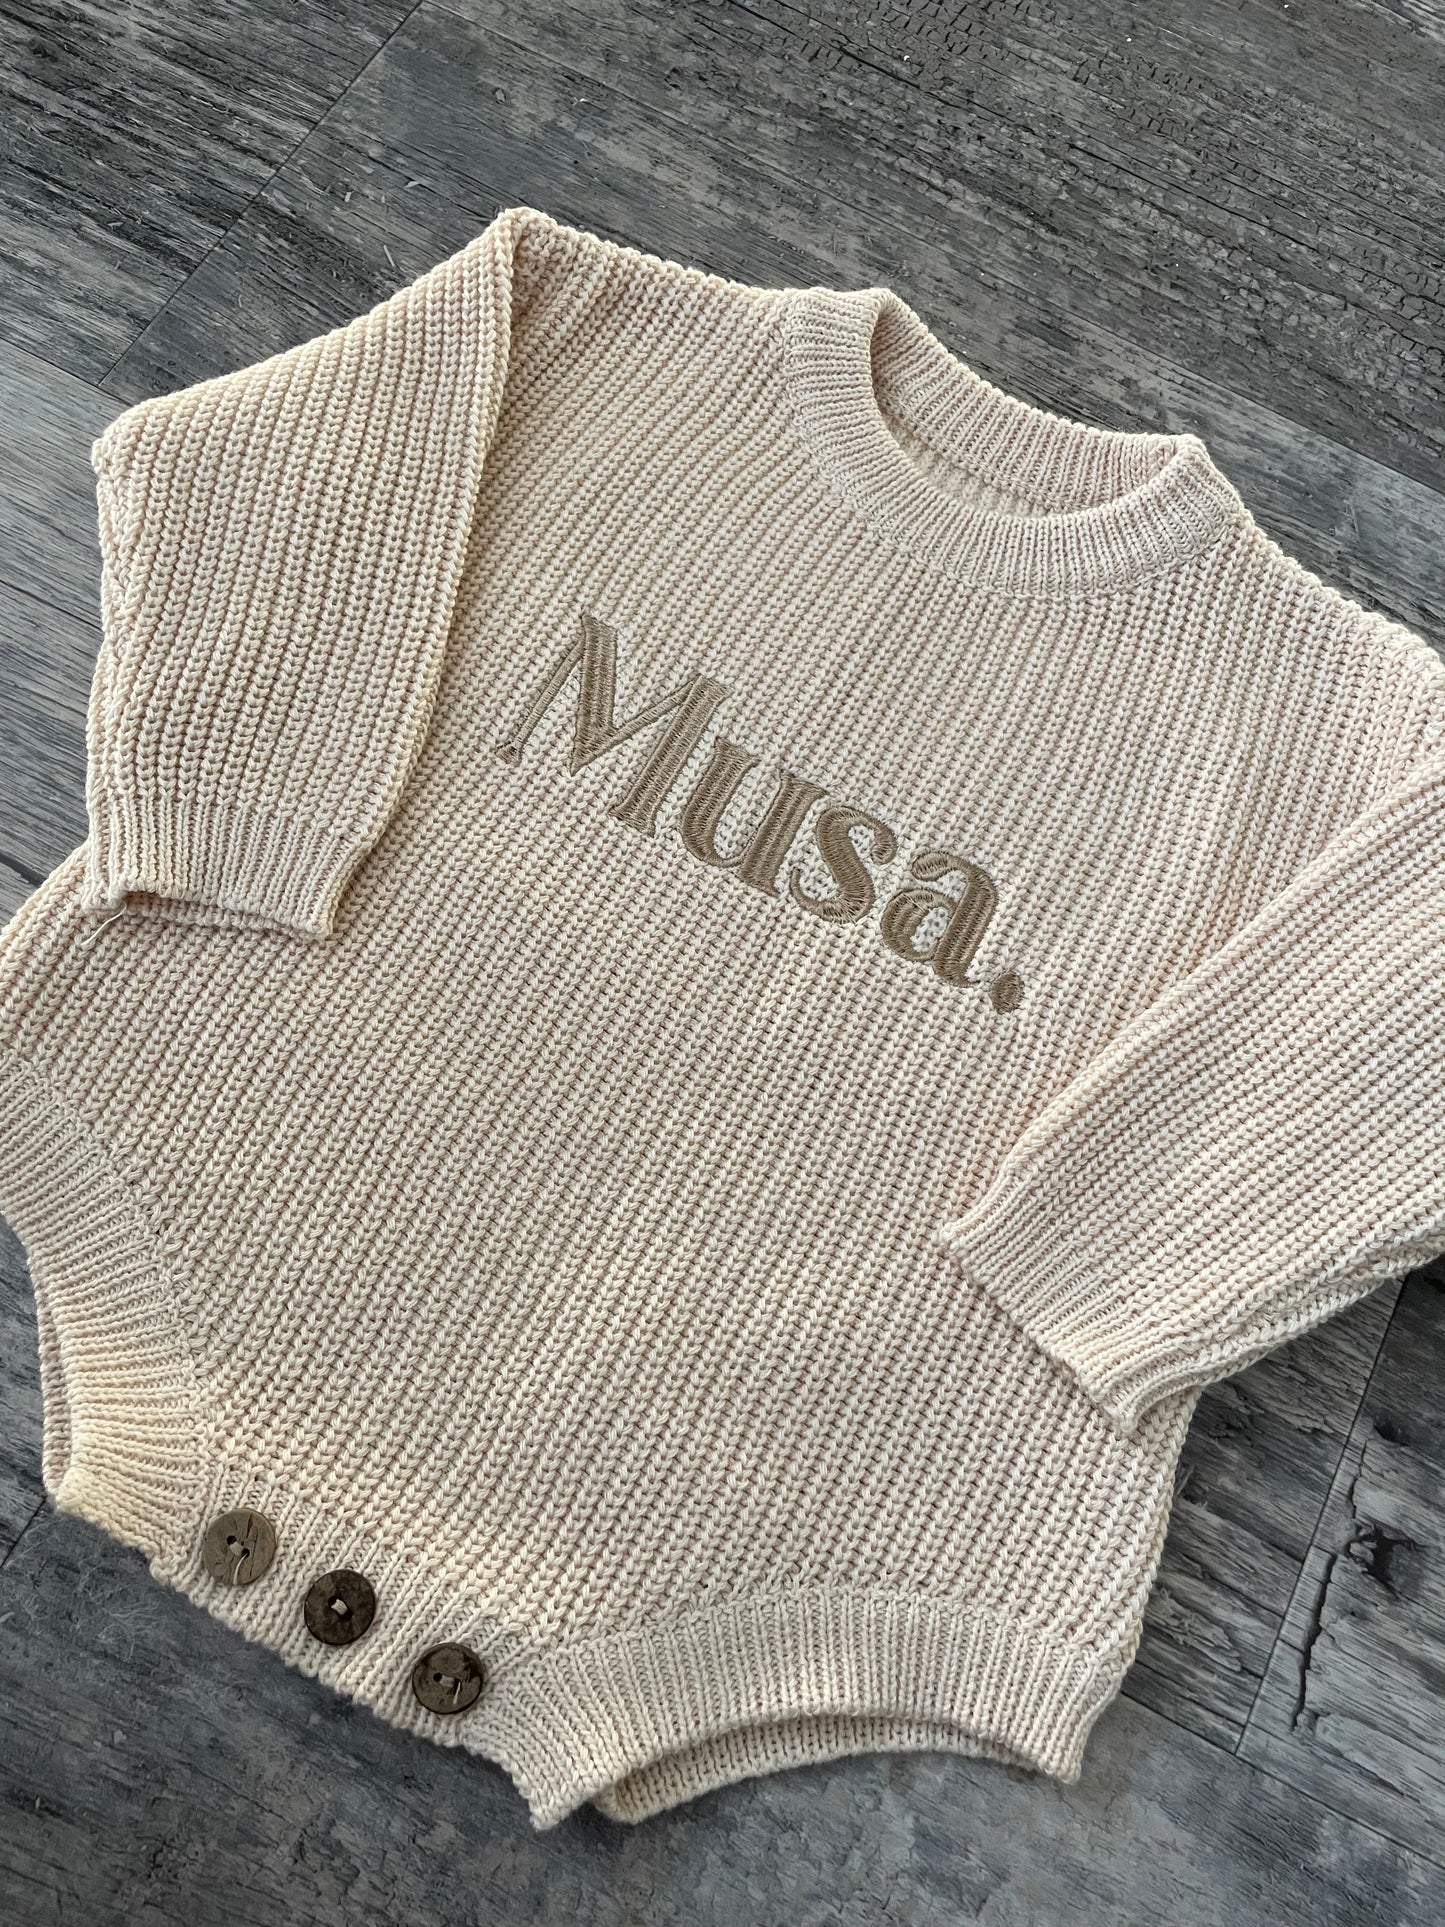 Personalised knitted rompers